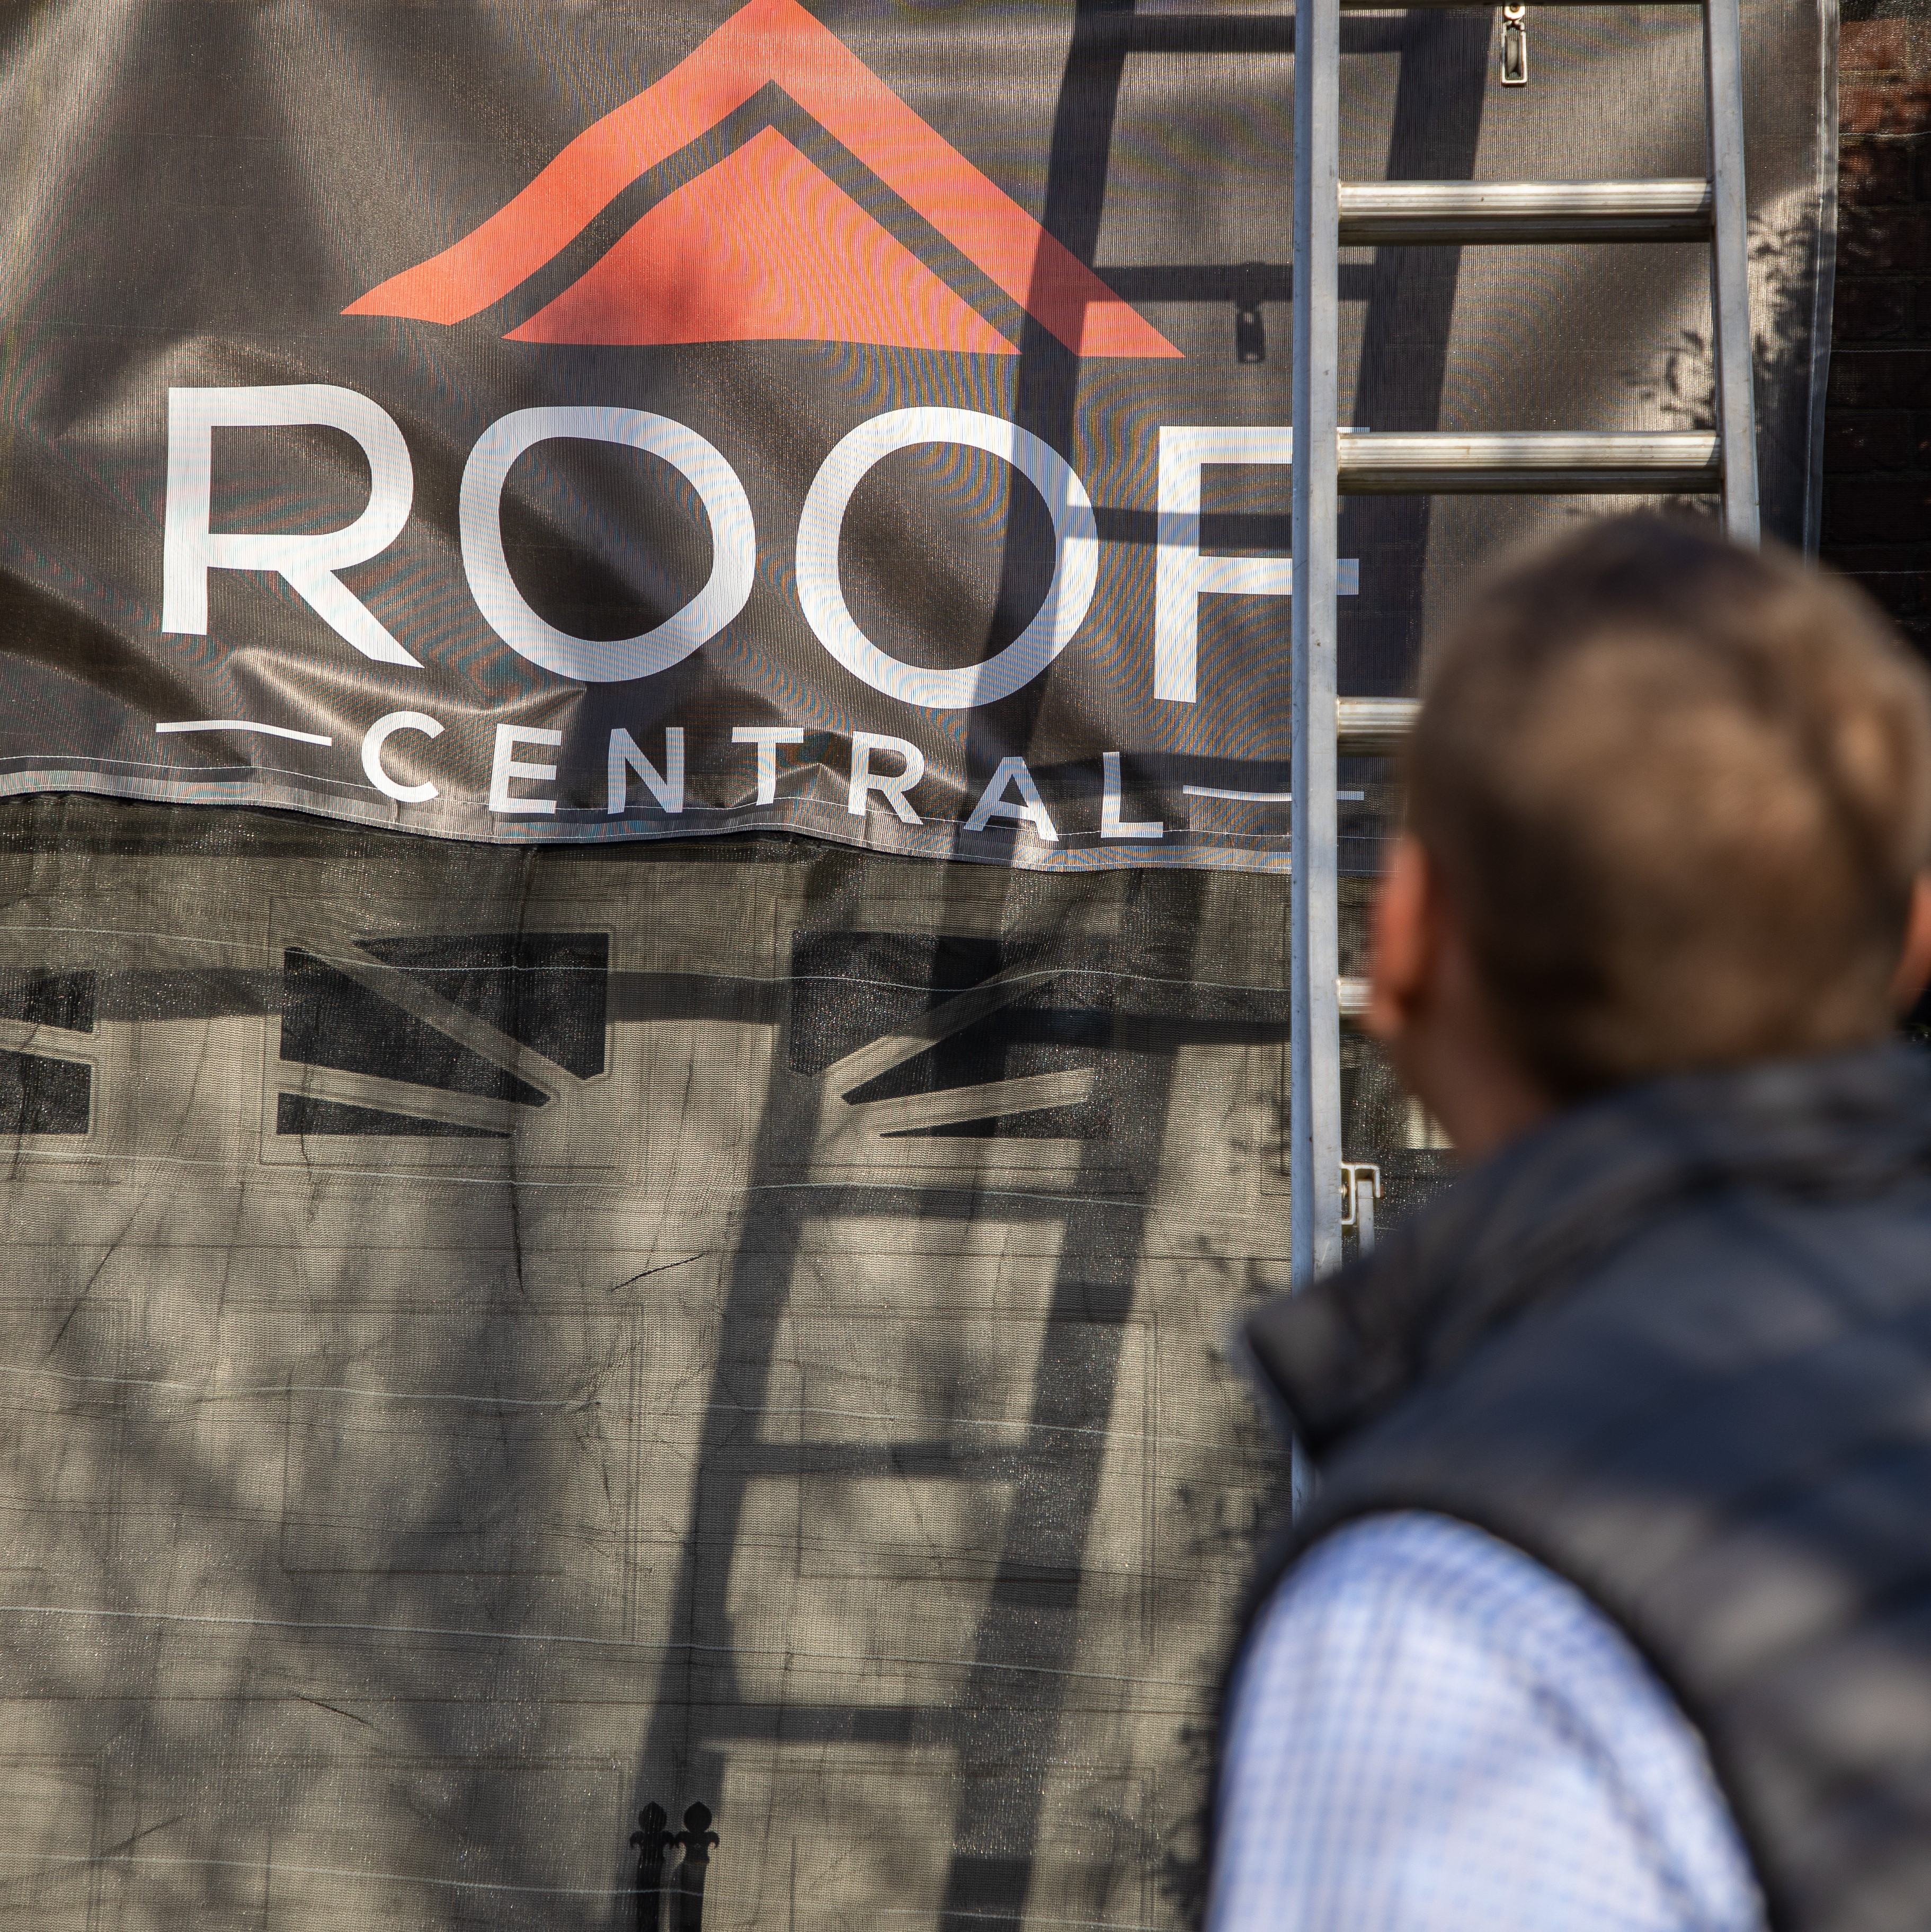 A roofer securing the area to start a roof inspection.